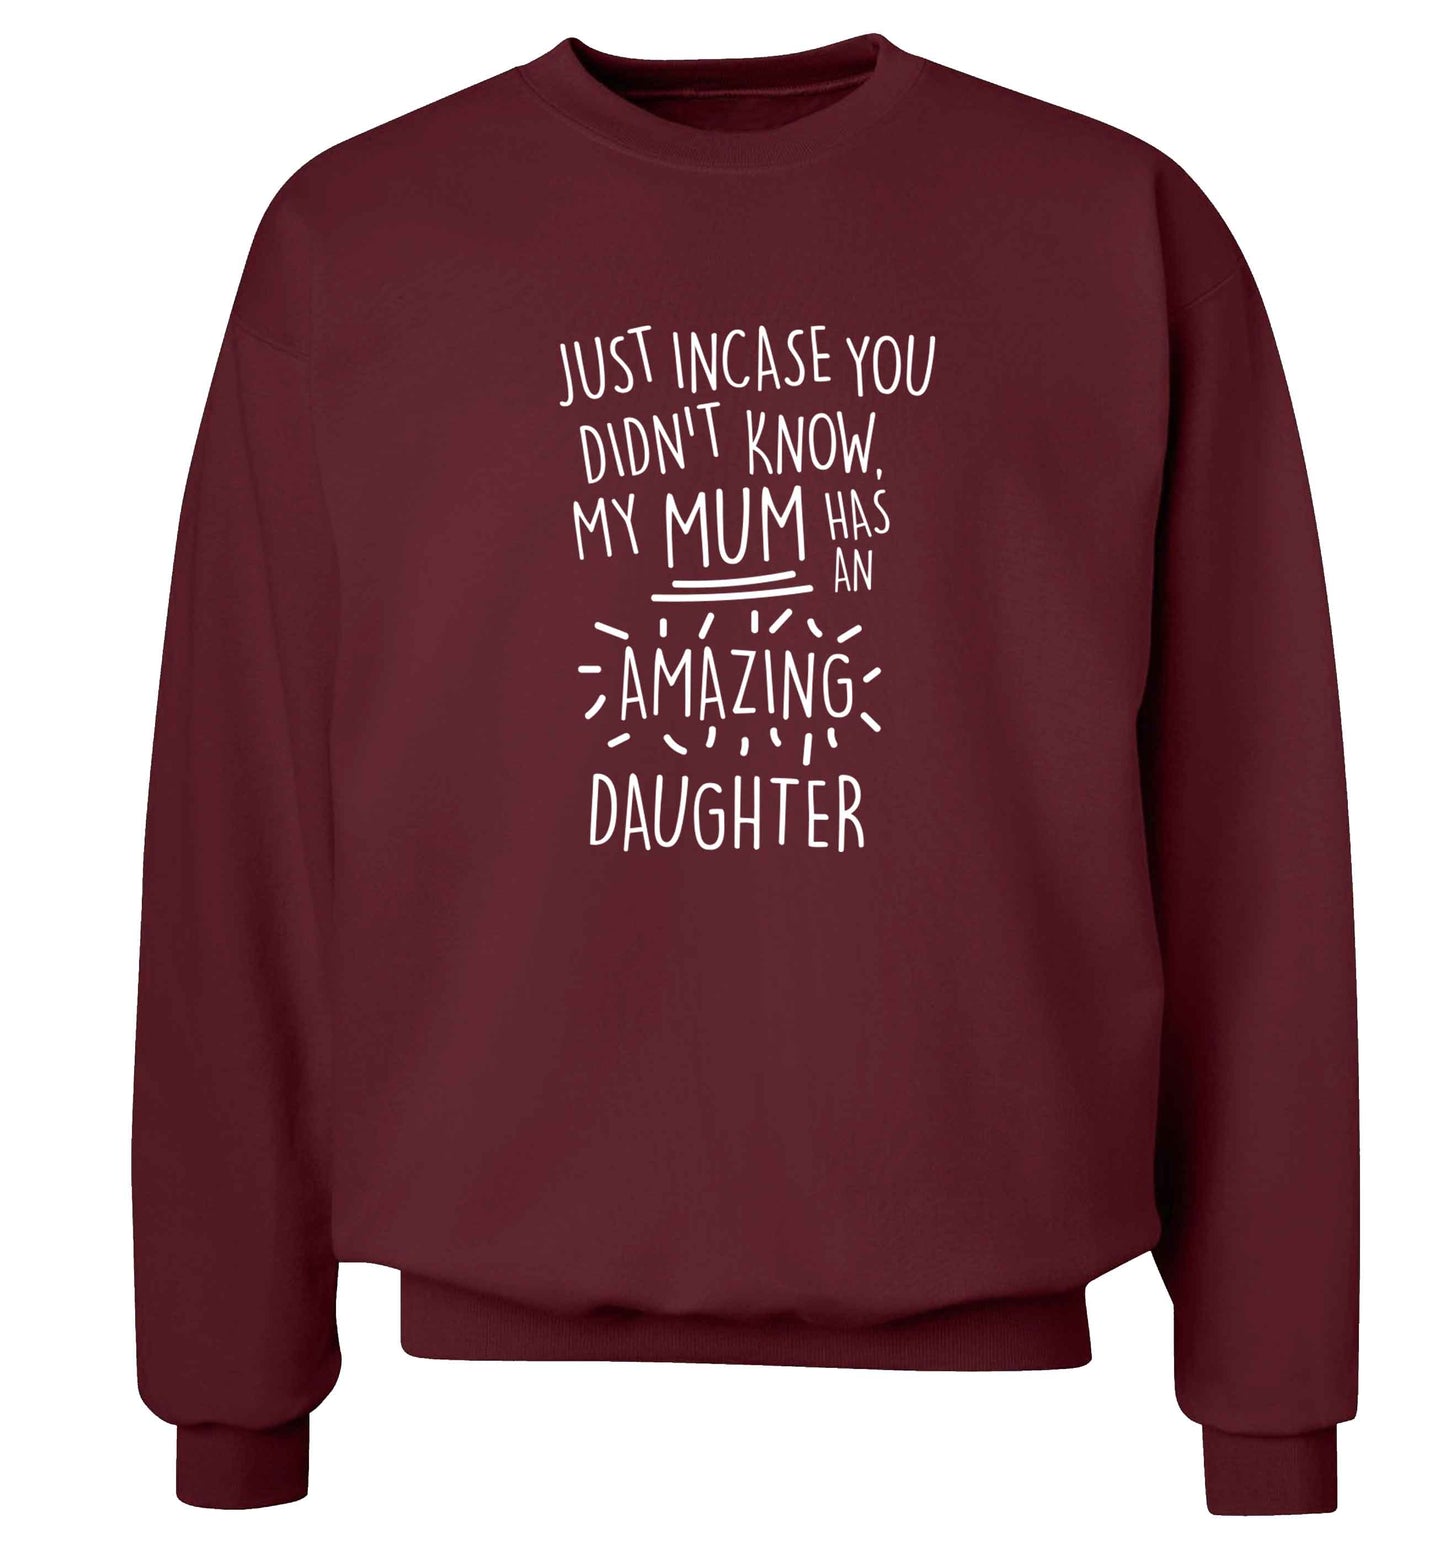 Just incase you didn't know my mum has an amazing daughter adult's unisex maroon sweater 2XL